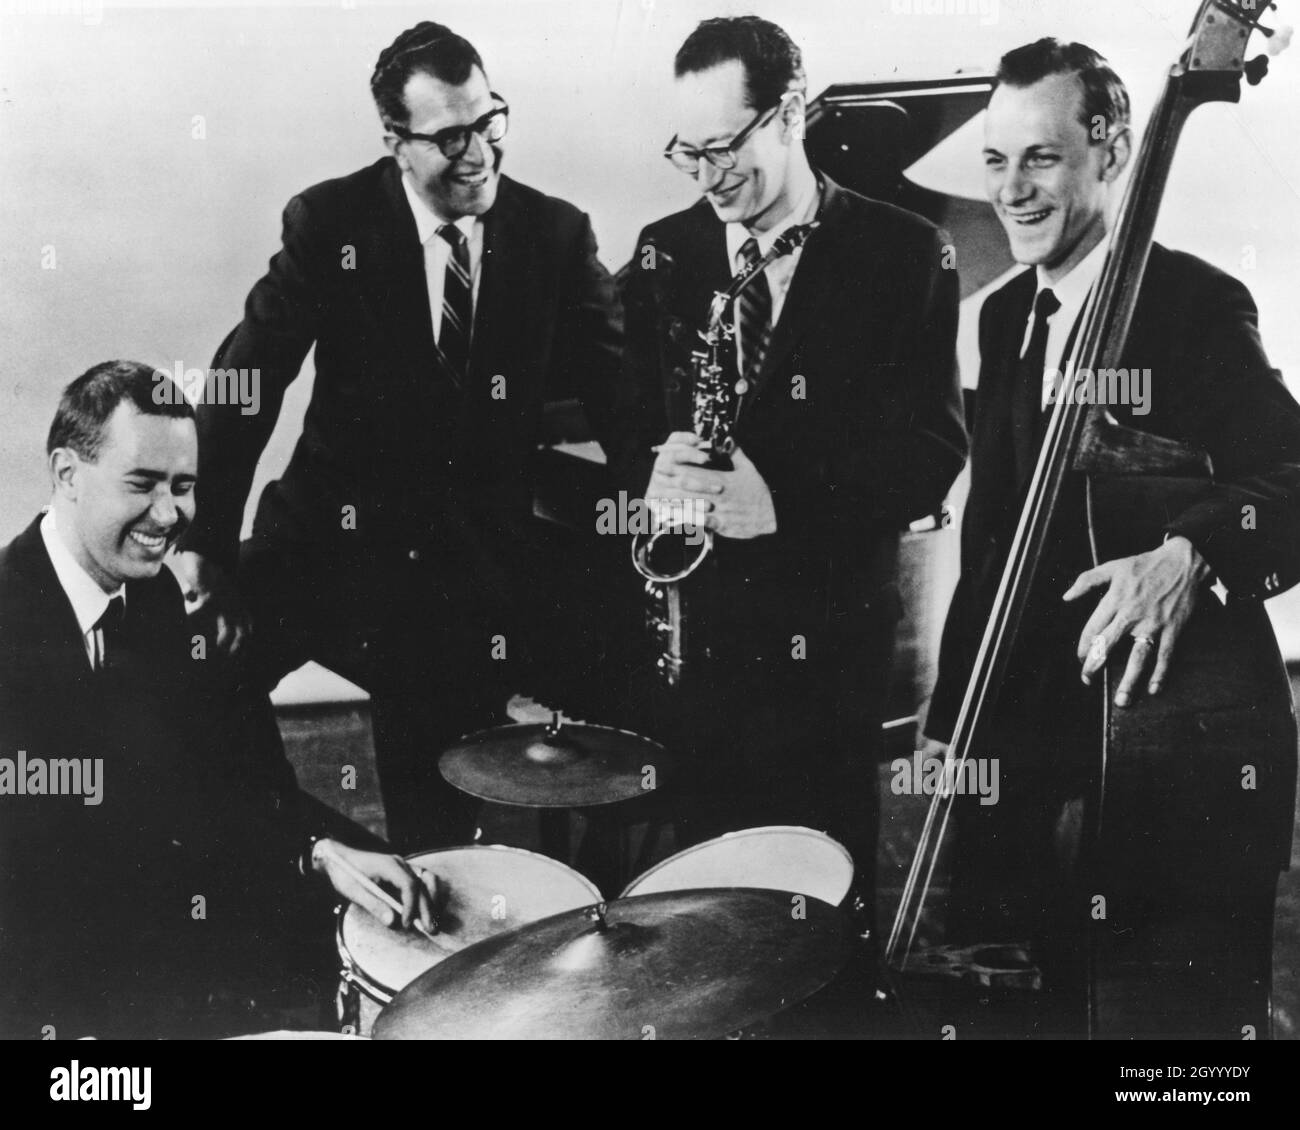 Dave Brubeck (second from the left) and his Quartet as they appeared at the 1959 Newport Jazz Festival. 1959. Stock Photo